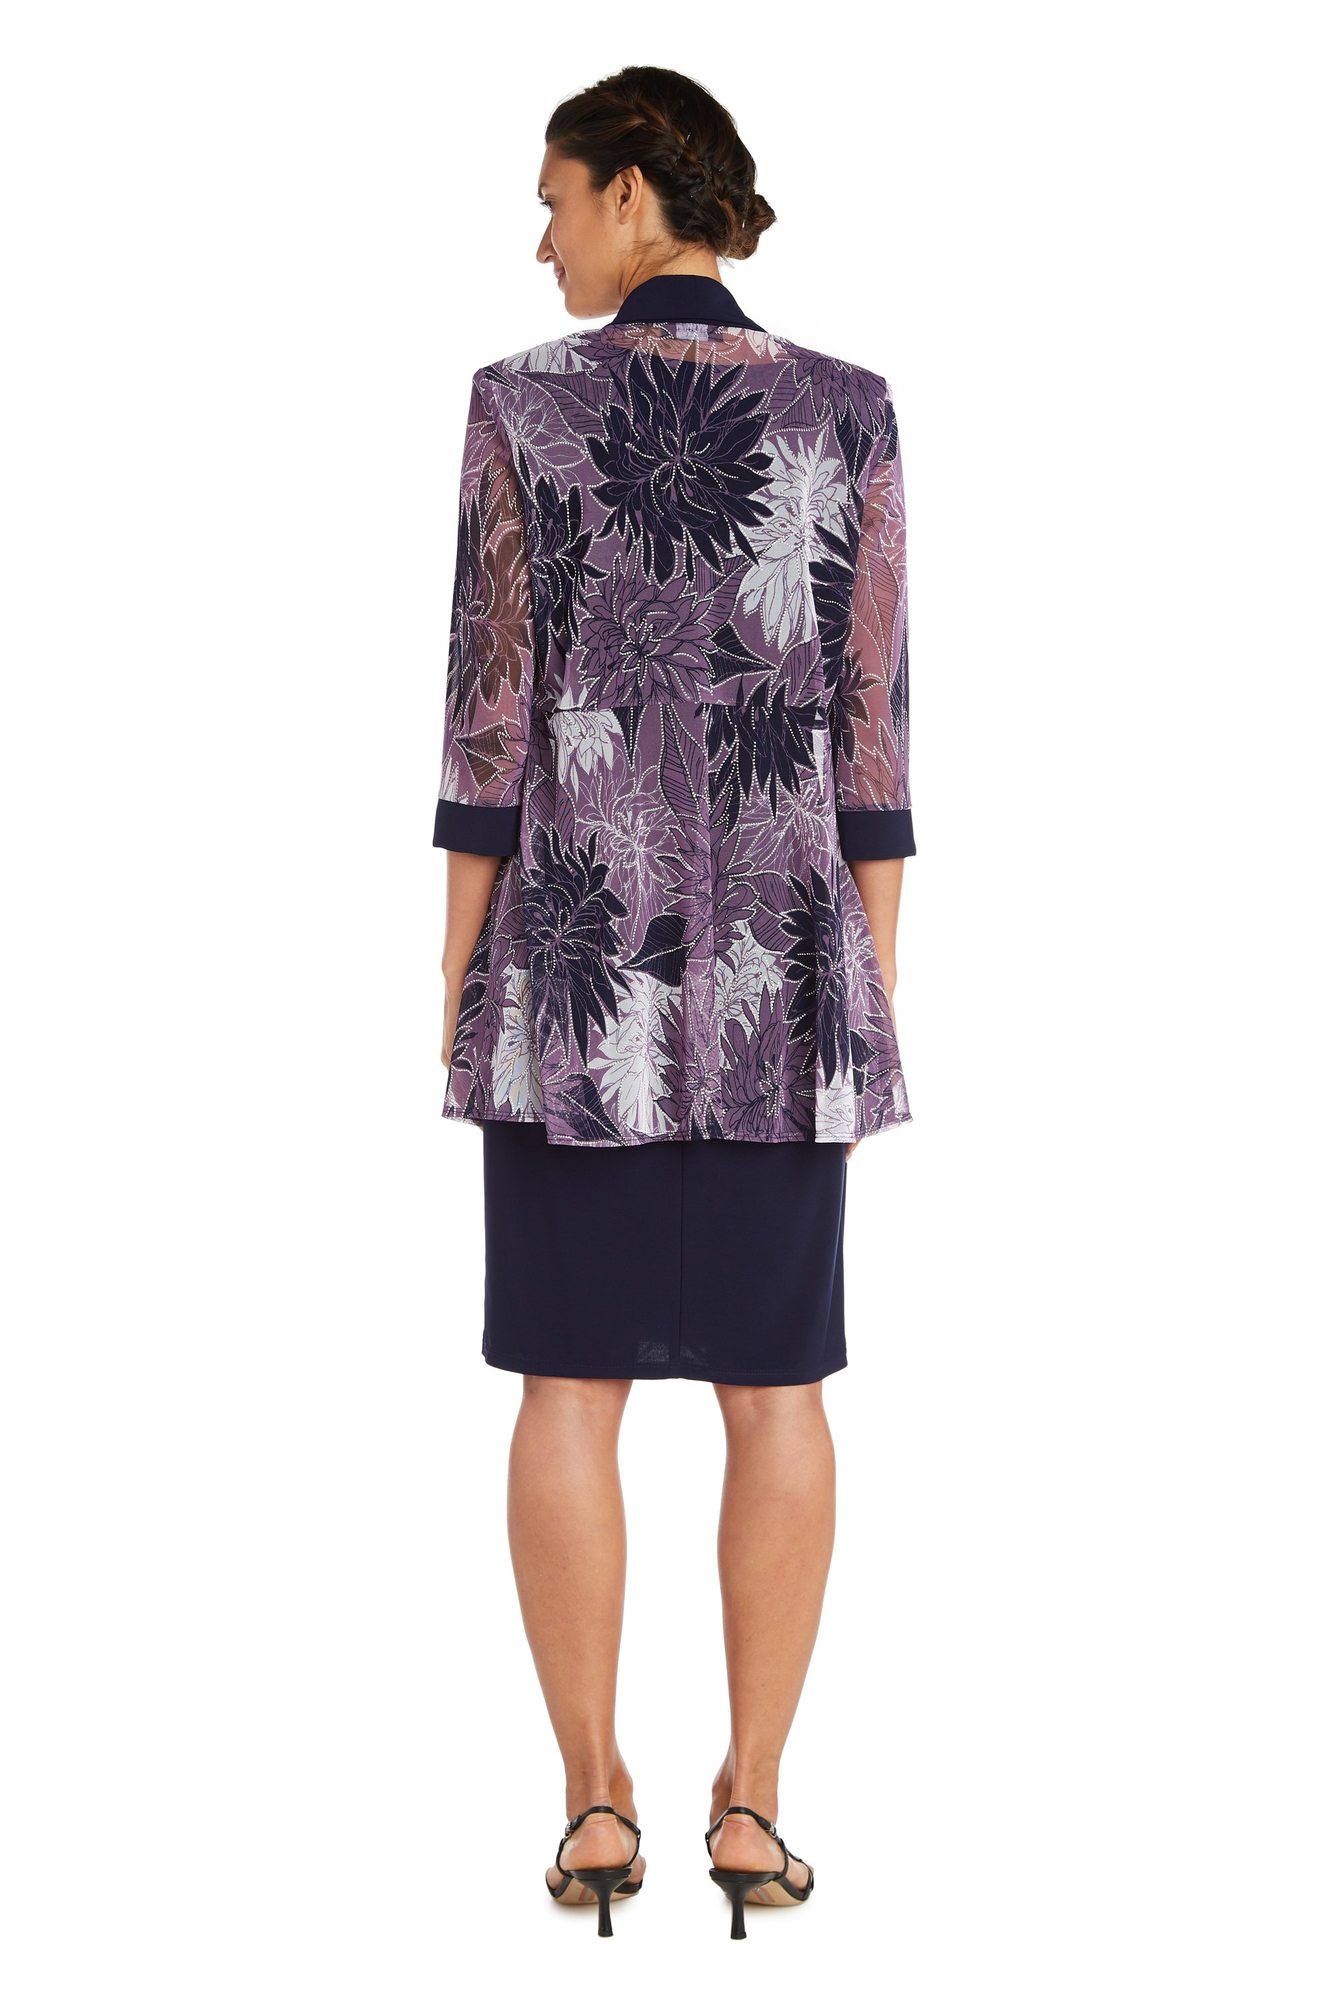 RM Richards Women's Two-Piece Printed Jacket and Dress Set Petite 